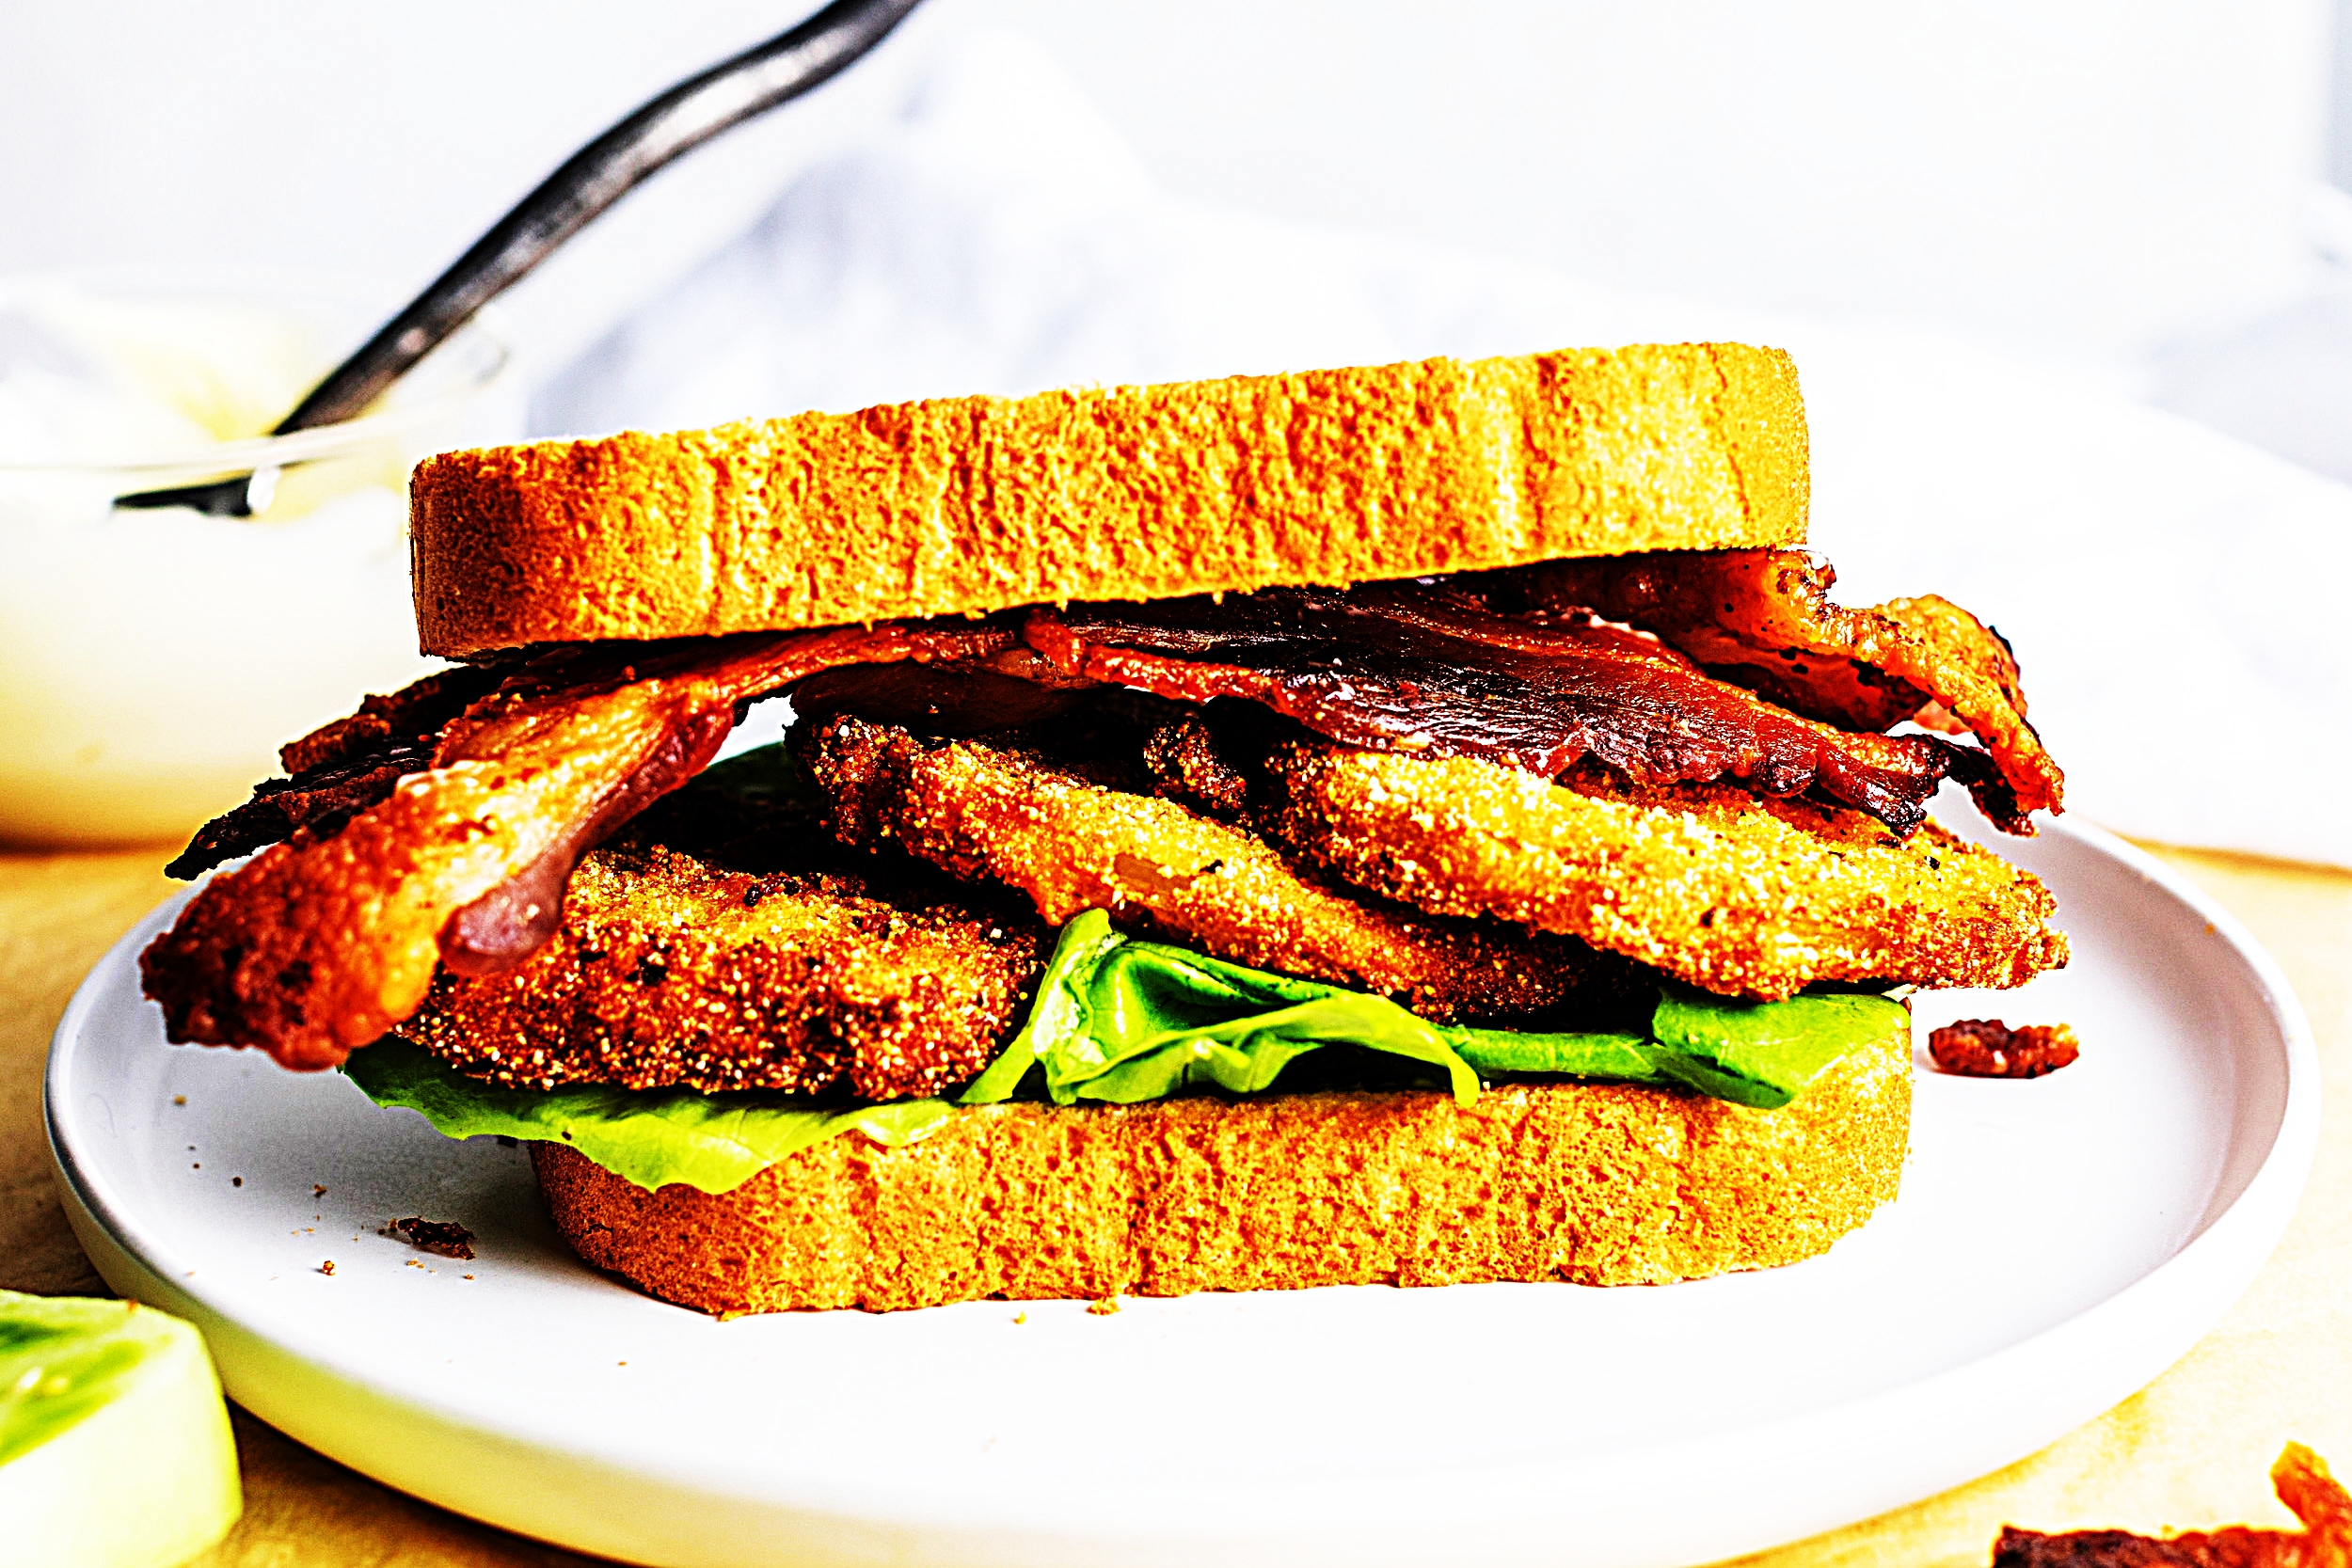 Stupid-Easy Recipe for Southern Fried Green Tomato BLT Sandwiches (#1 Top-Rated)